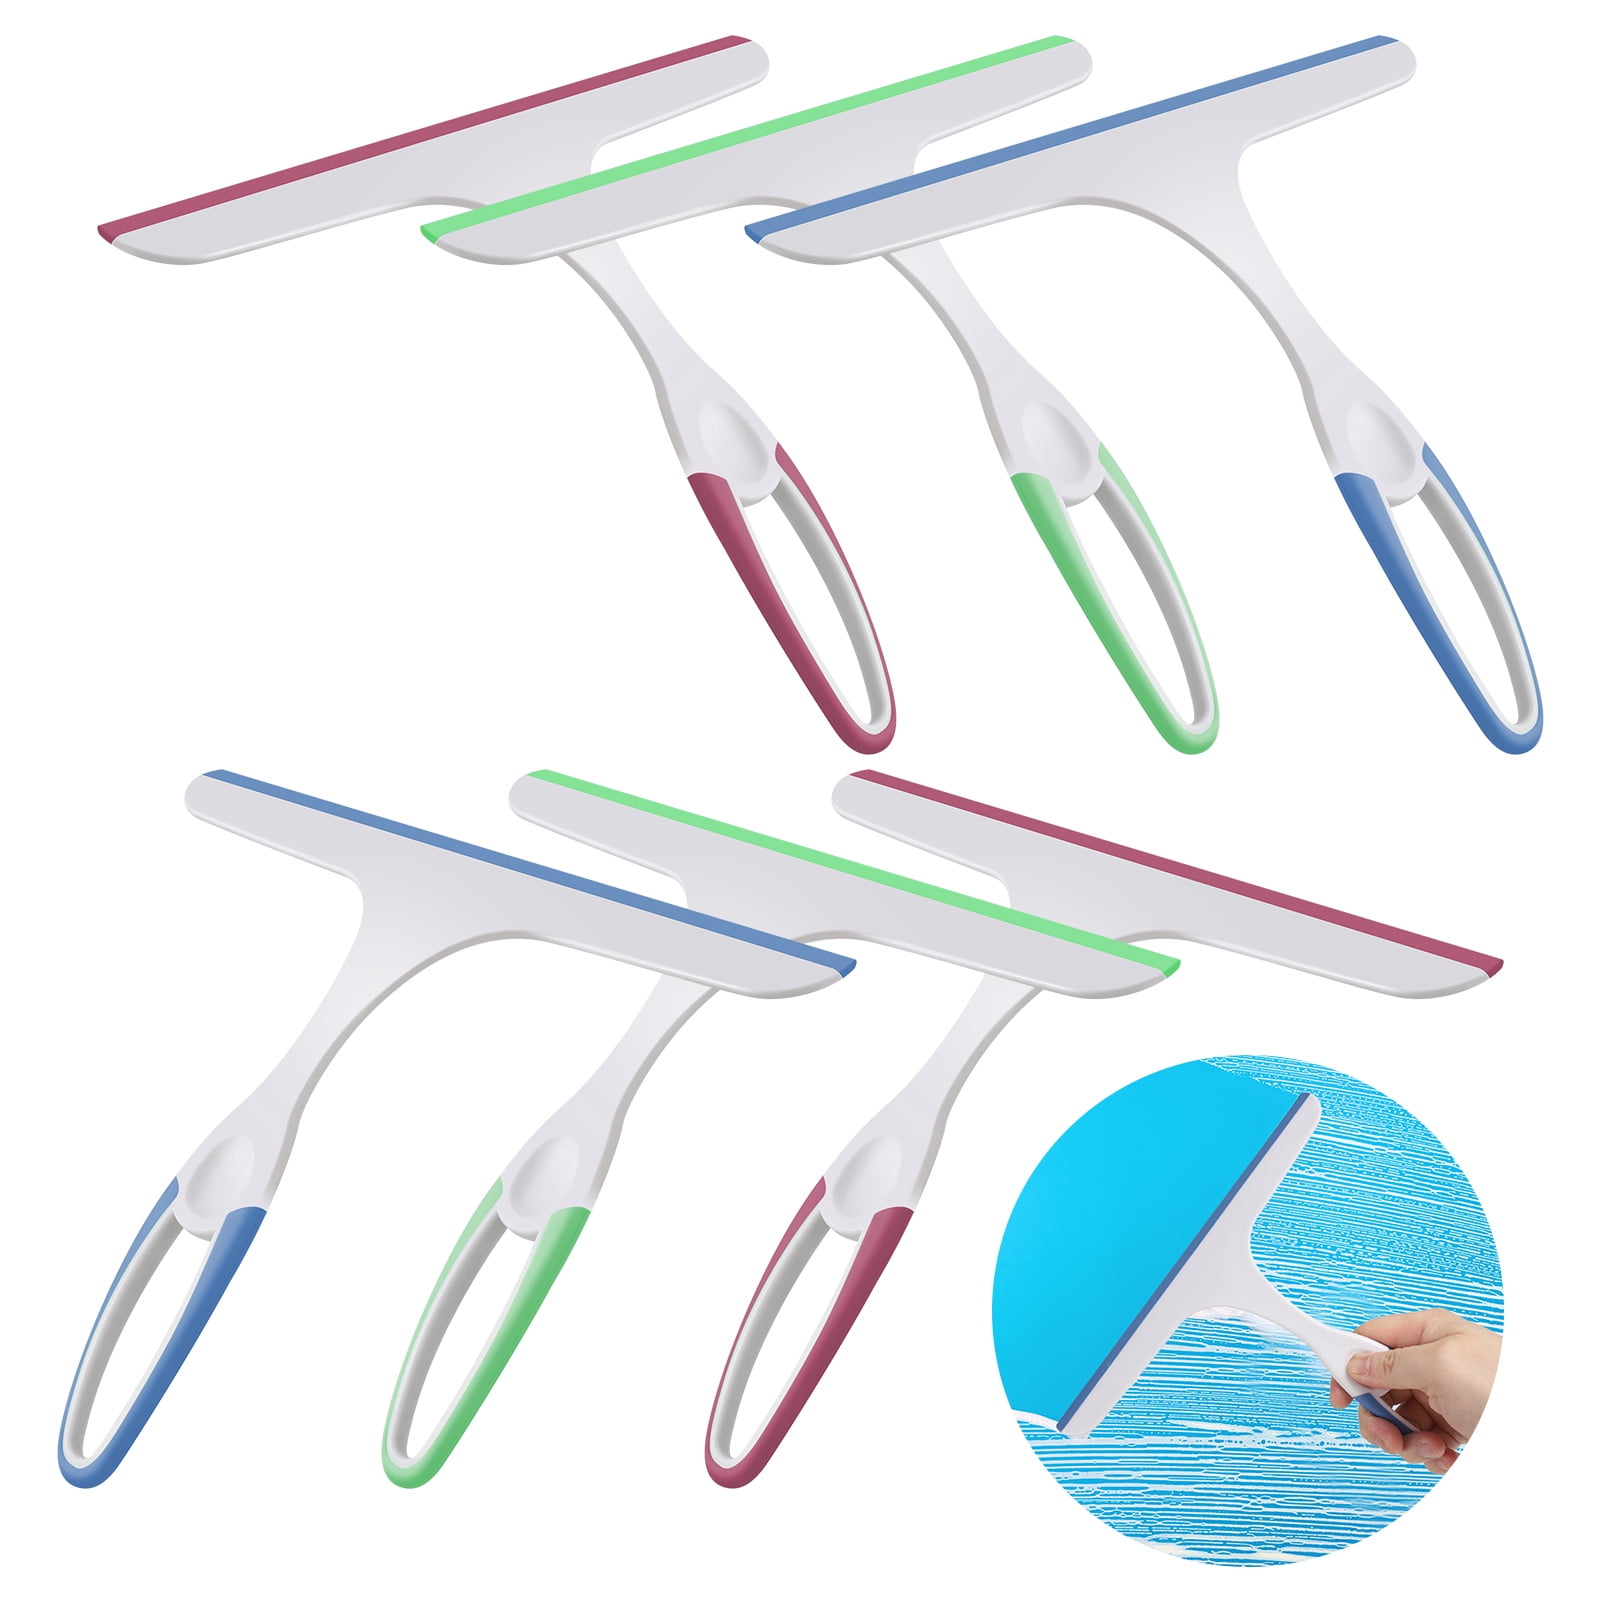 Super Flexible Silicone Squeegee, Auto Water Blade, Water Wiper, Shower  Squeegee for Car Windshield, - ASM089 - IdeaStage Promotional Products